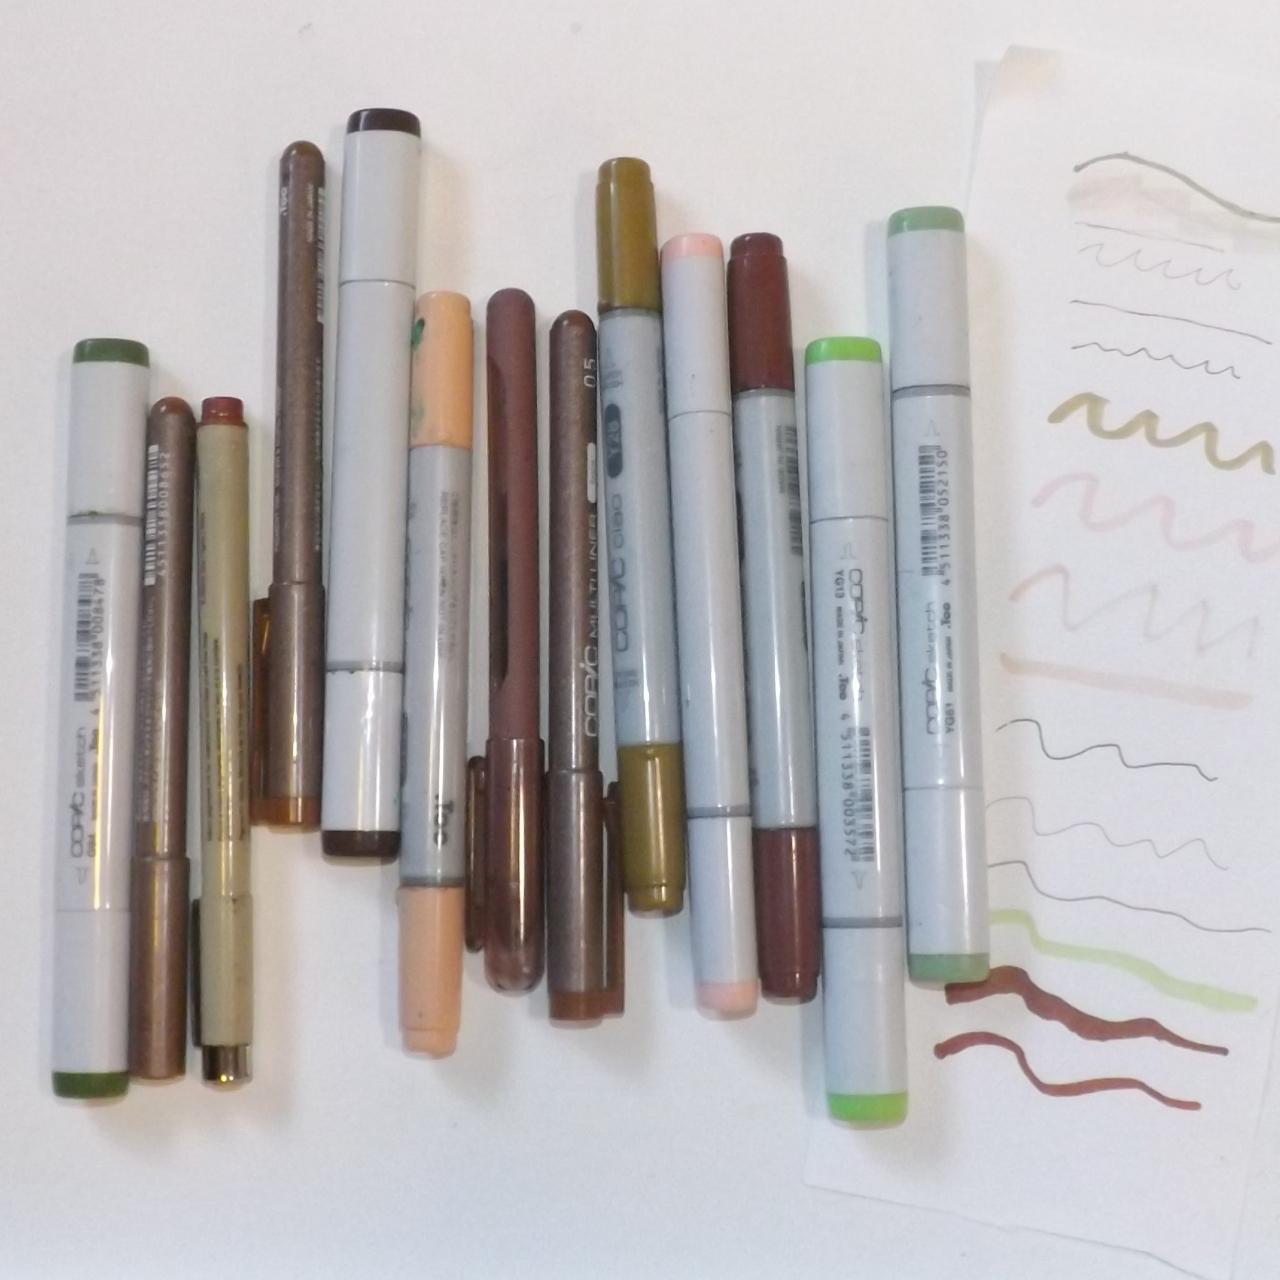 13 Copic Pen And Marker Lot 8 Copic Brush Markers 3 Depop